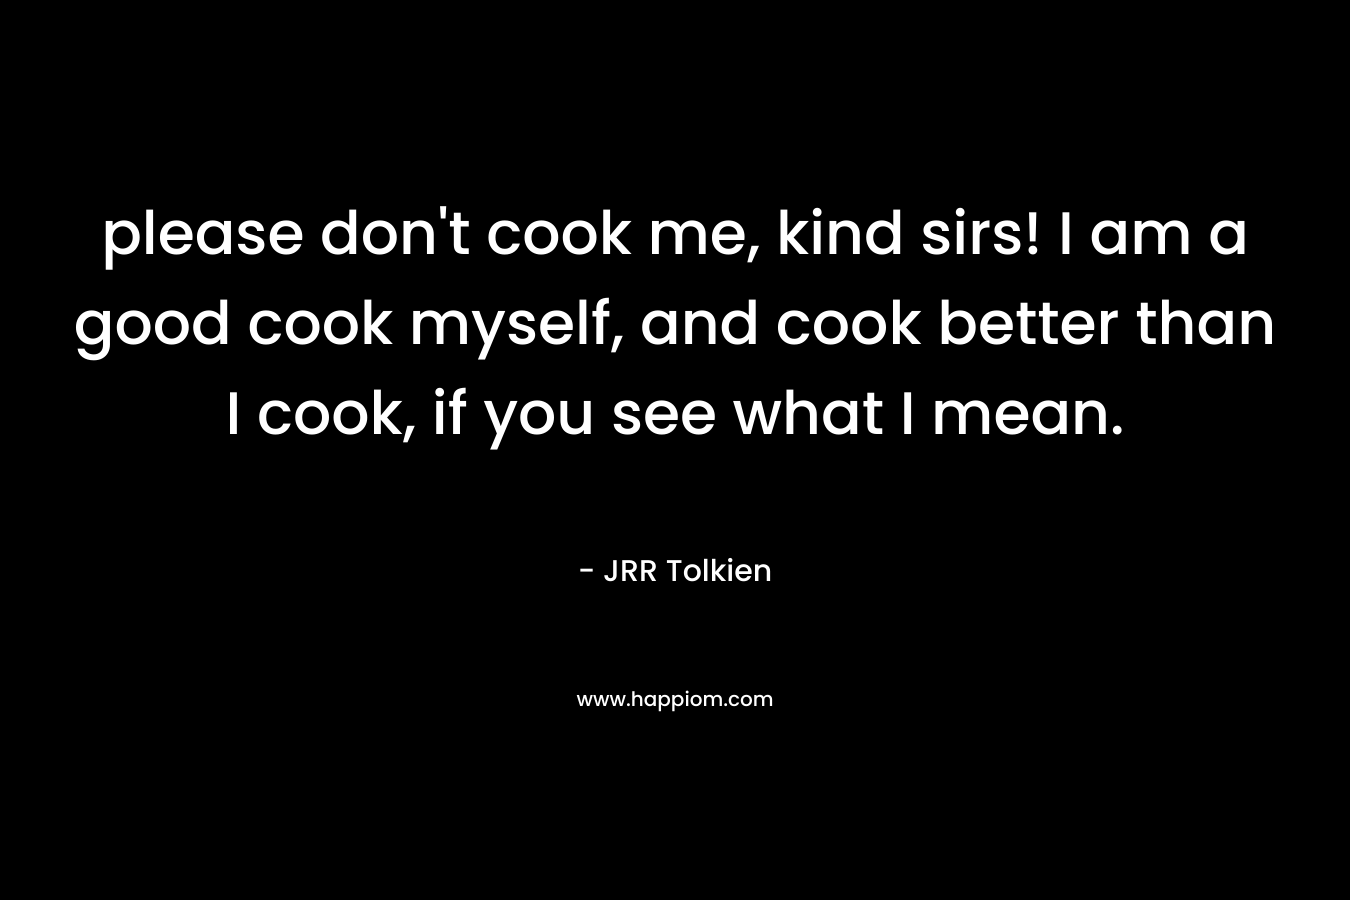 please don’t cook me, kind sirs! I am a good cook myself, and cook better than I cook, if you see what I mean. – JRR Tolkien